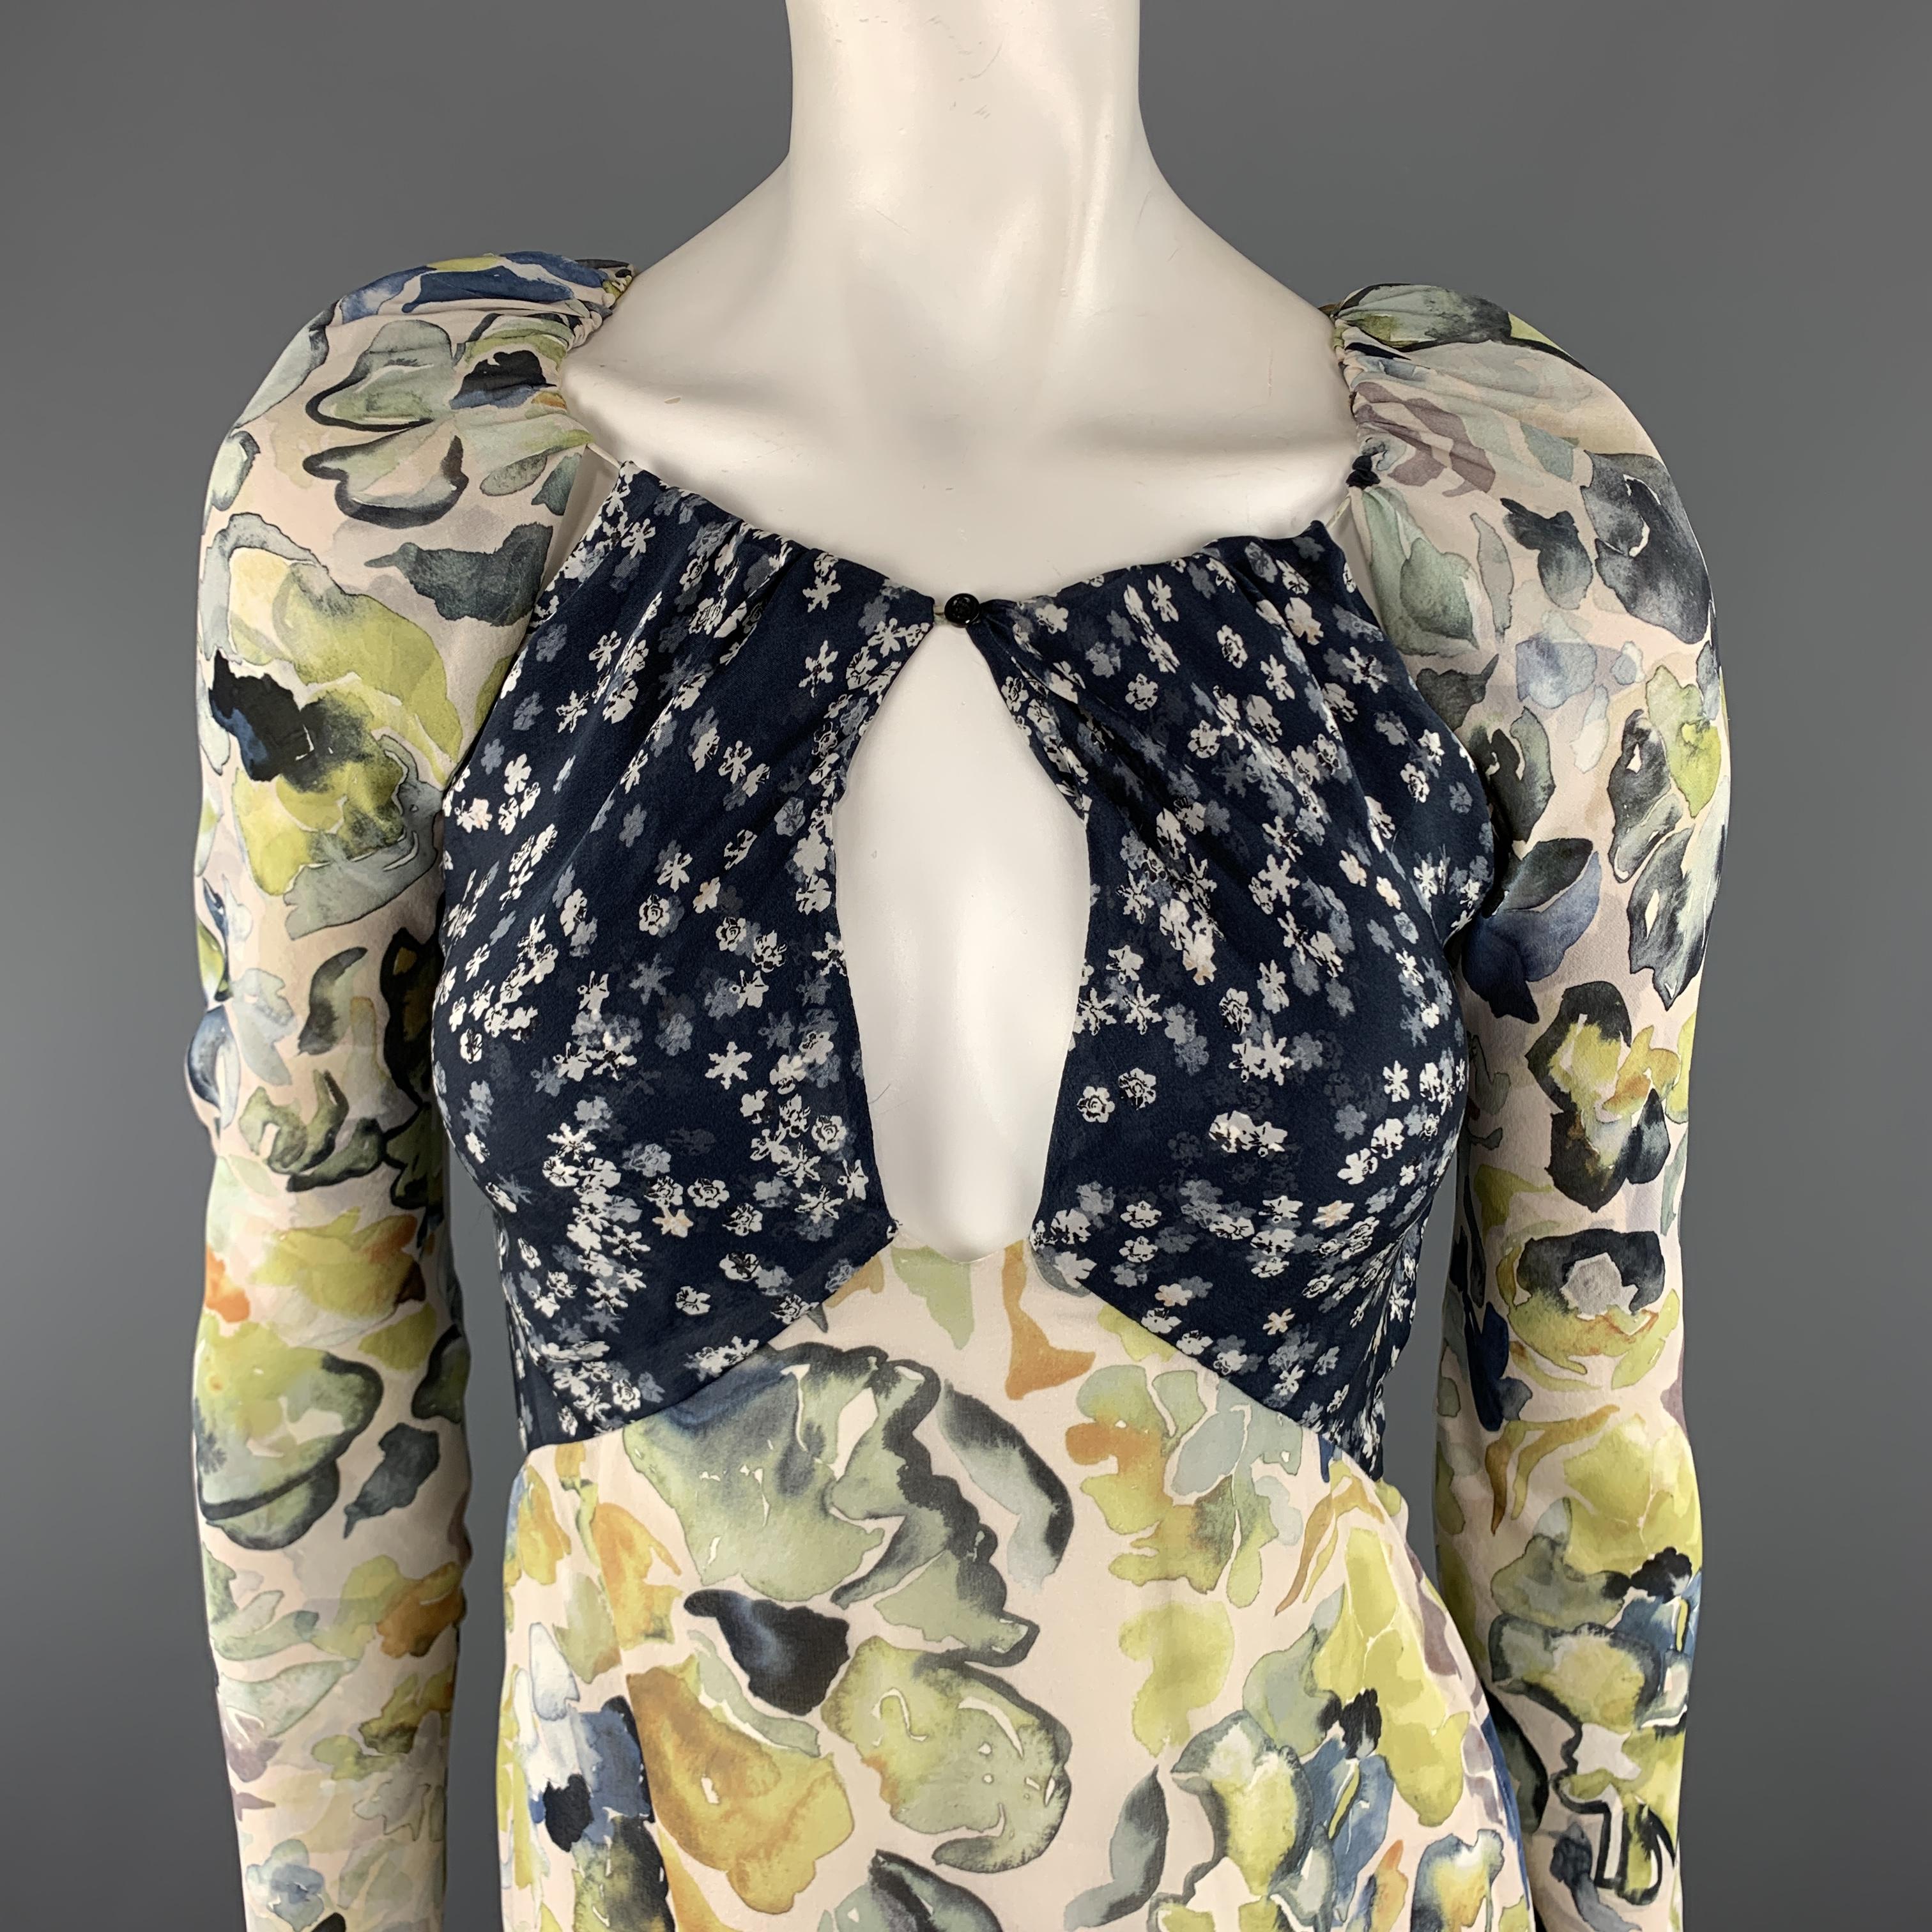 CHLOE dress comes in cream silk chiffon with green and yellow floral print with a gathered neckline, navy floral bust with cutouts, long sleeves, and A line skirt.  Made in France.

Excellent Pre-Owned Condition.
Marked: FR